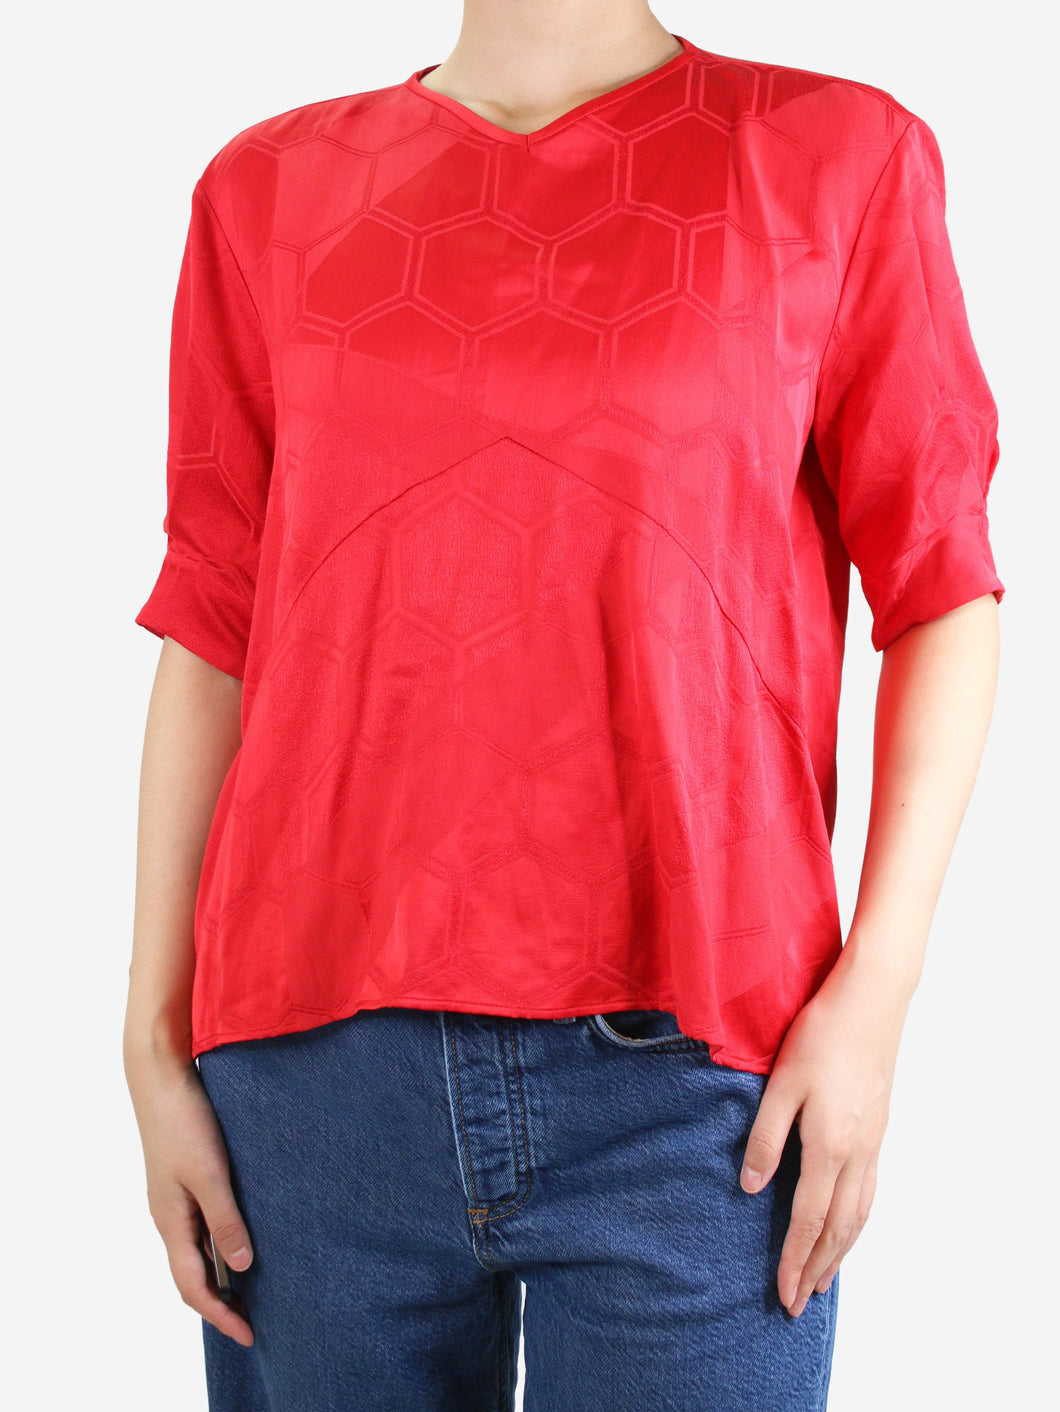 Red short-sleeved geometric top - size UK 10 Tops Isabel Marant 